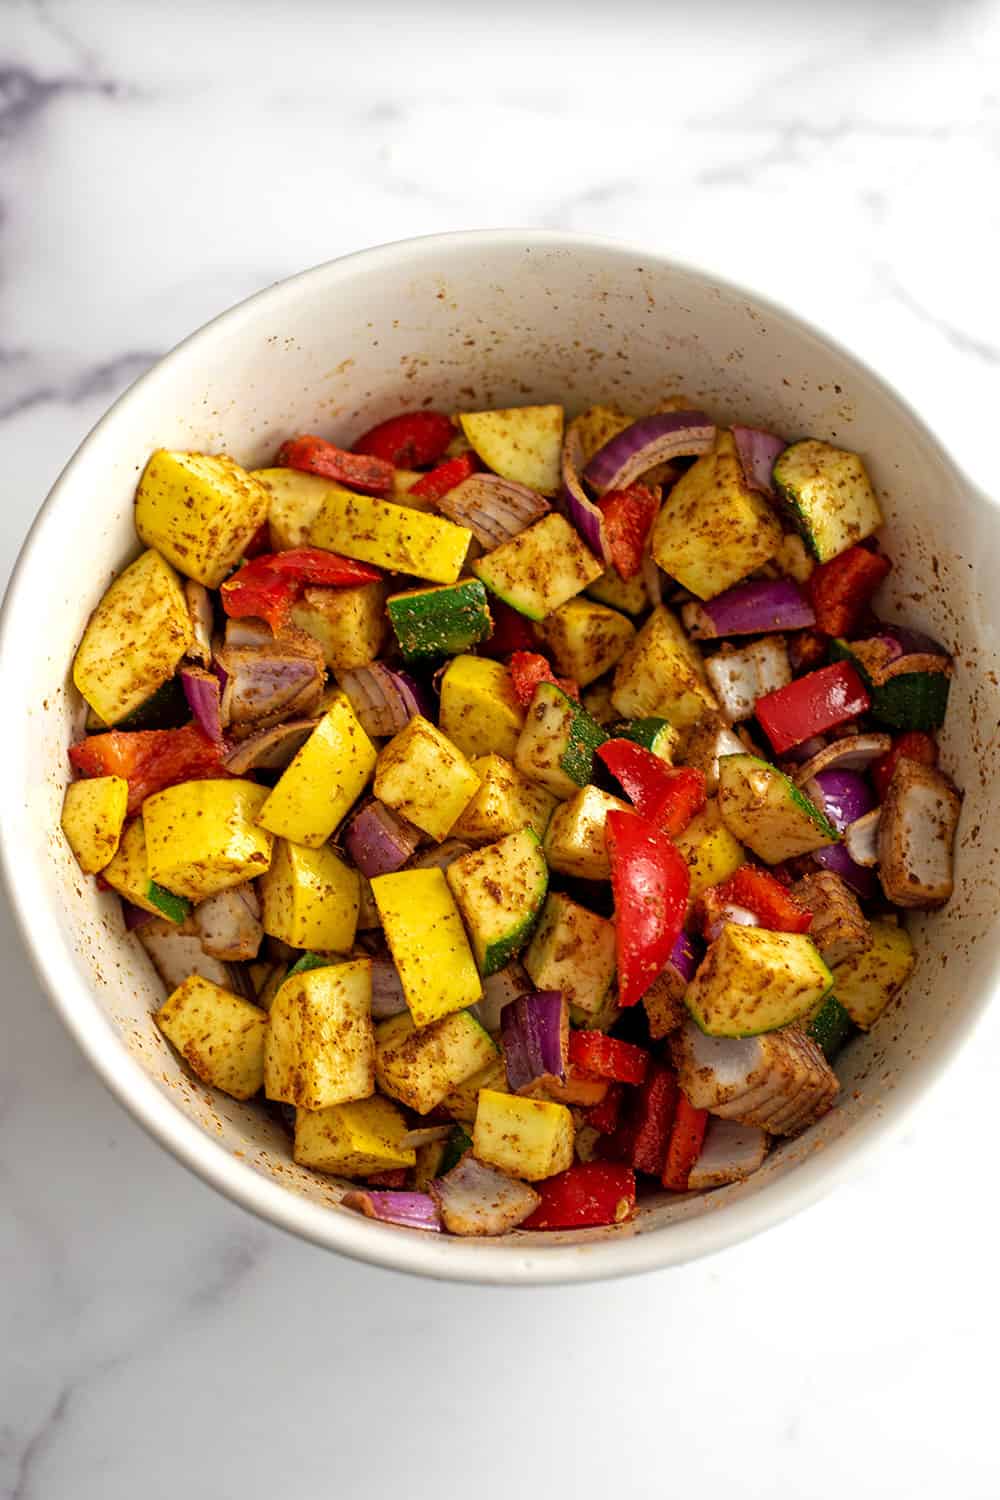 Chopped veggies in a white bowl coated in spices.